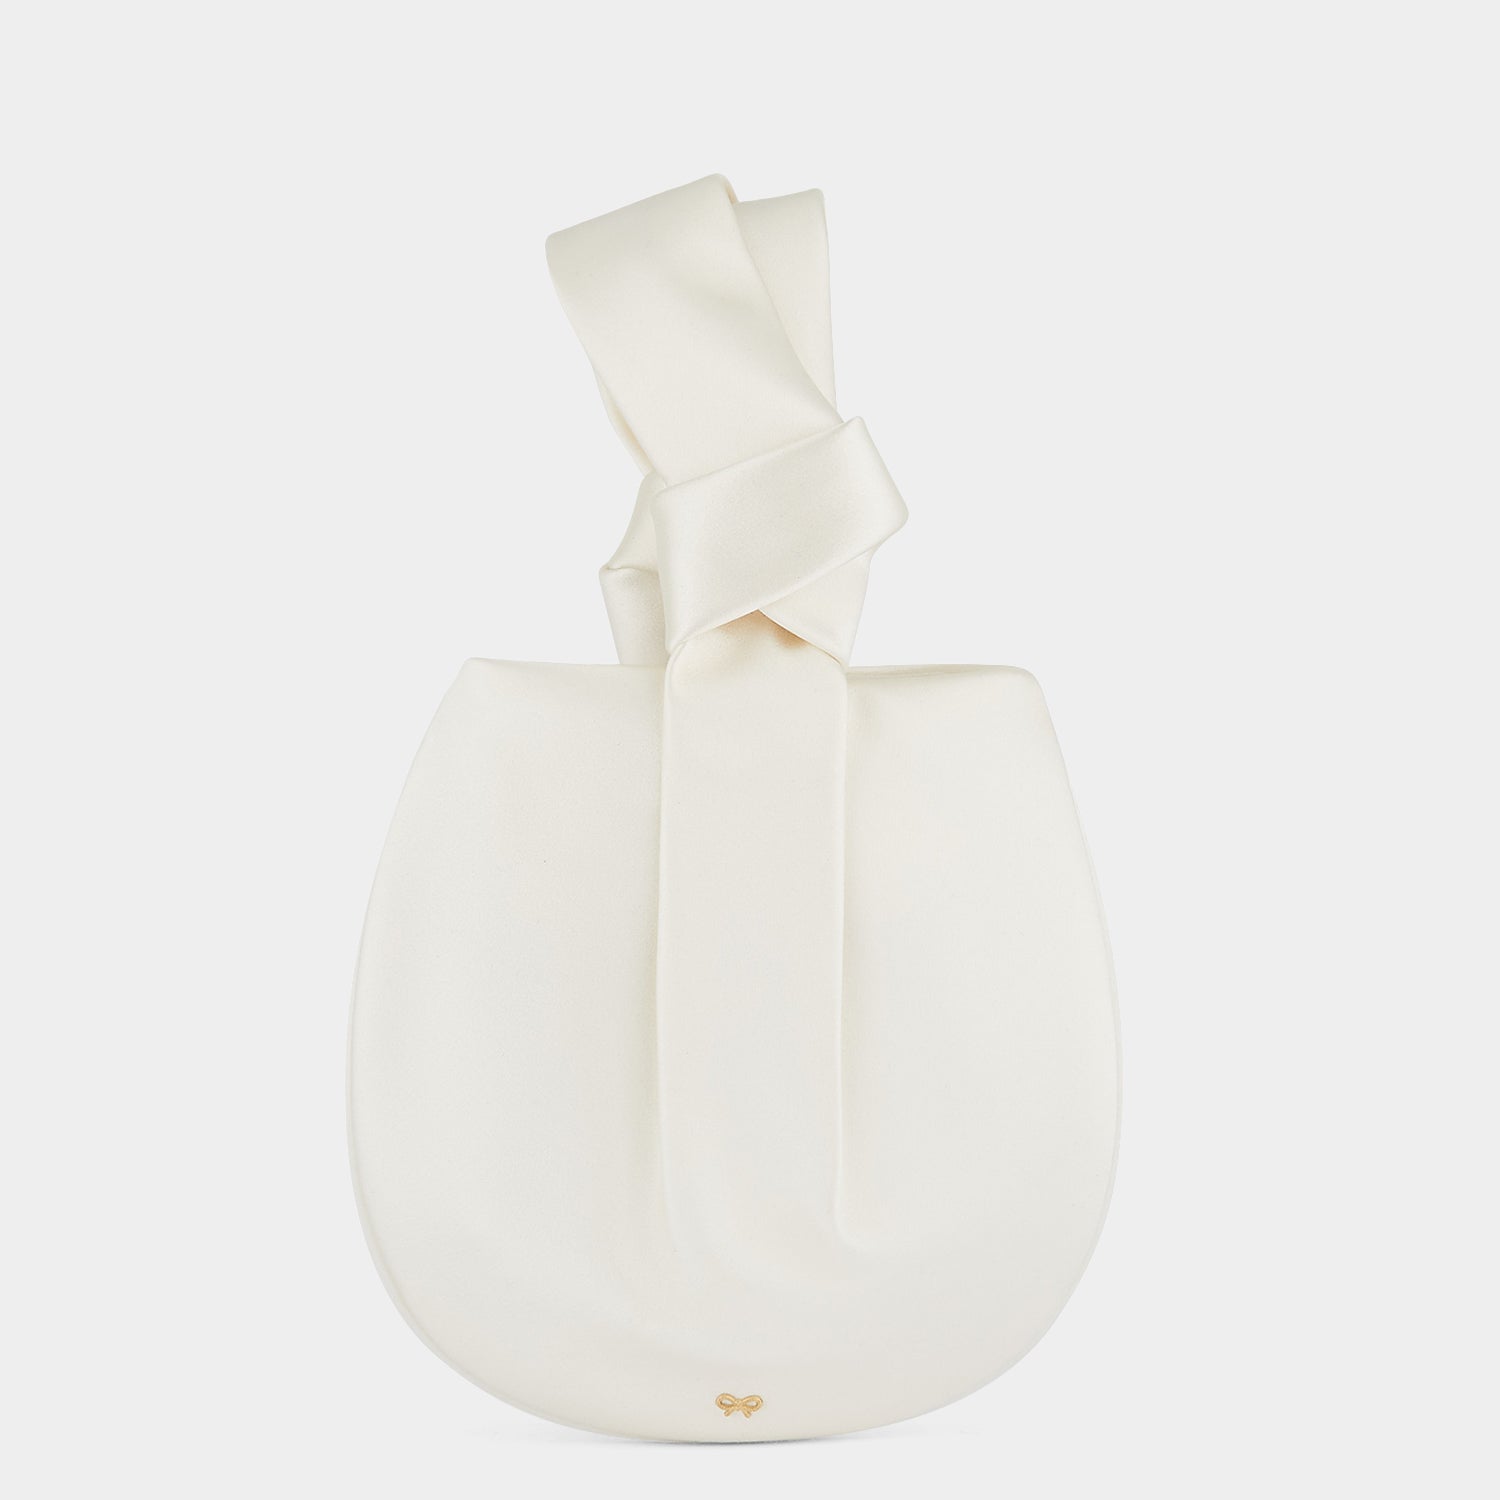 Tie the Knot Clutch -

                  
                    Double Satin in Ivory -
                  

                  Anya Hindmarch UK
